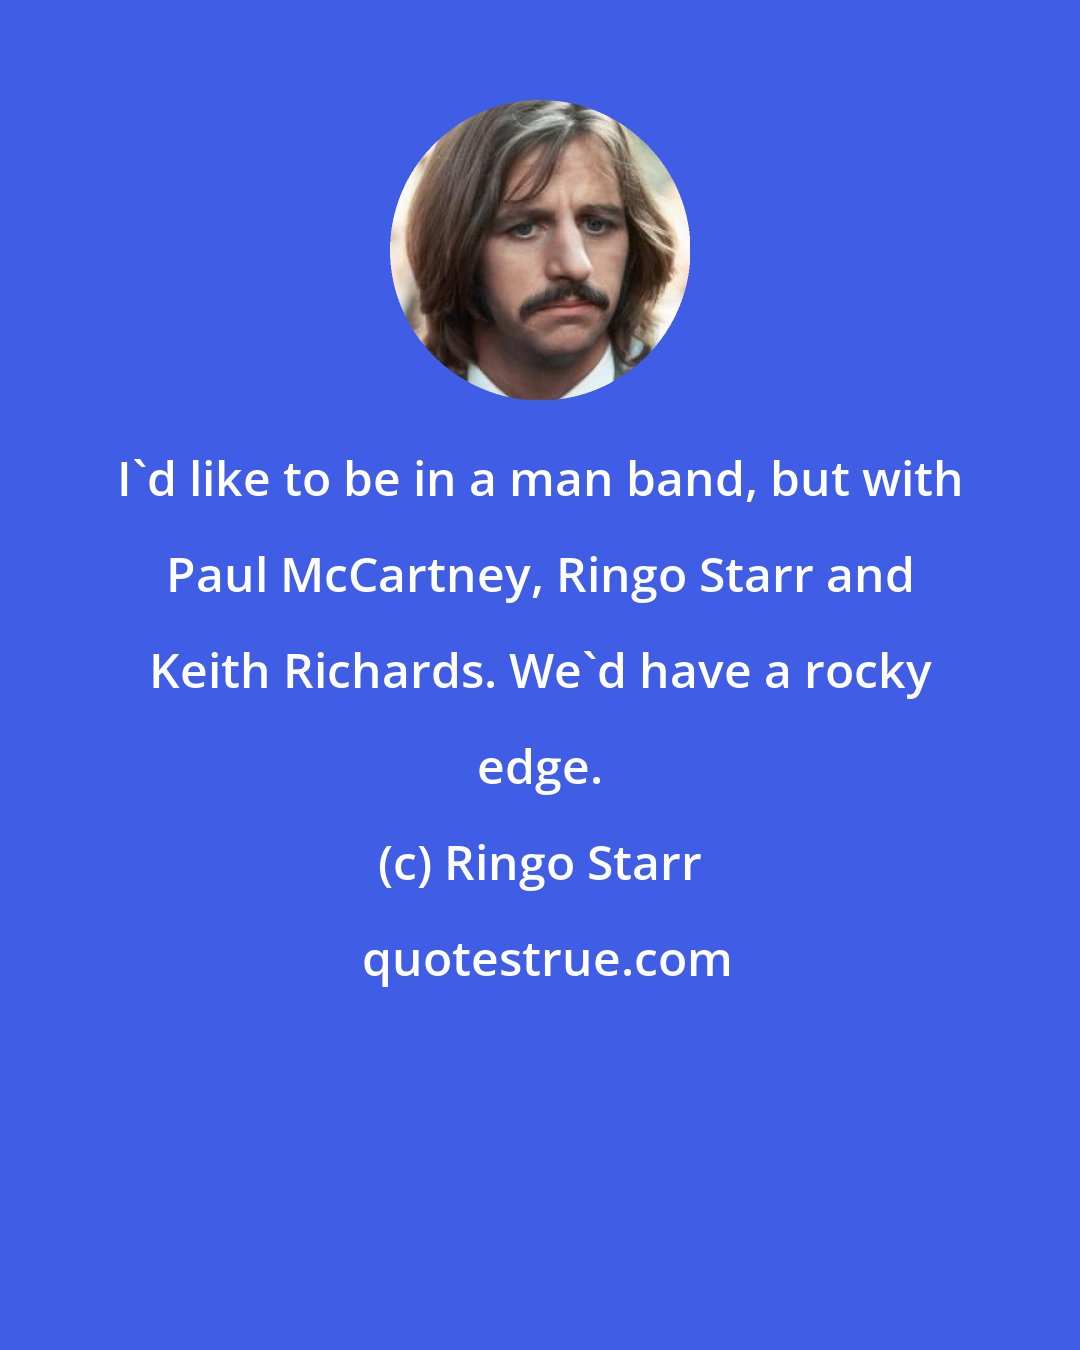 Ringo Starr: I'd like to be in a man band, but with Paul McCartney, Ringo Starr and Keith Richards. We'd have a rocky edge.